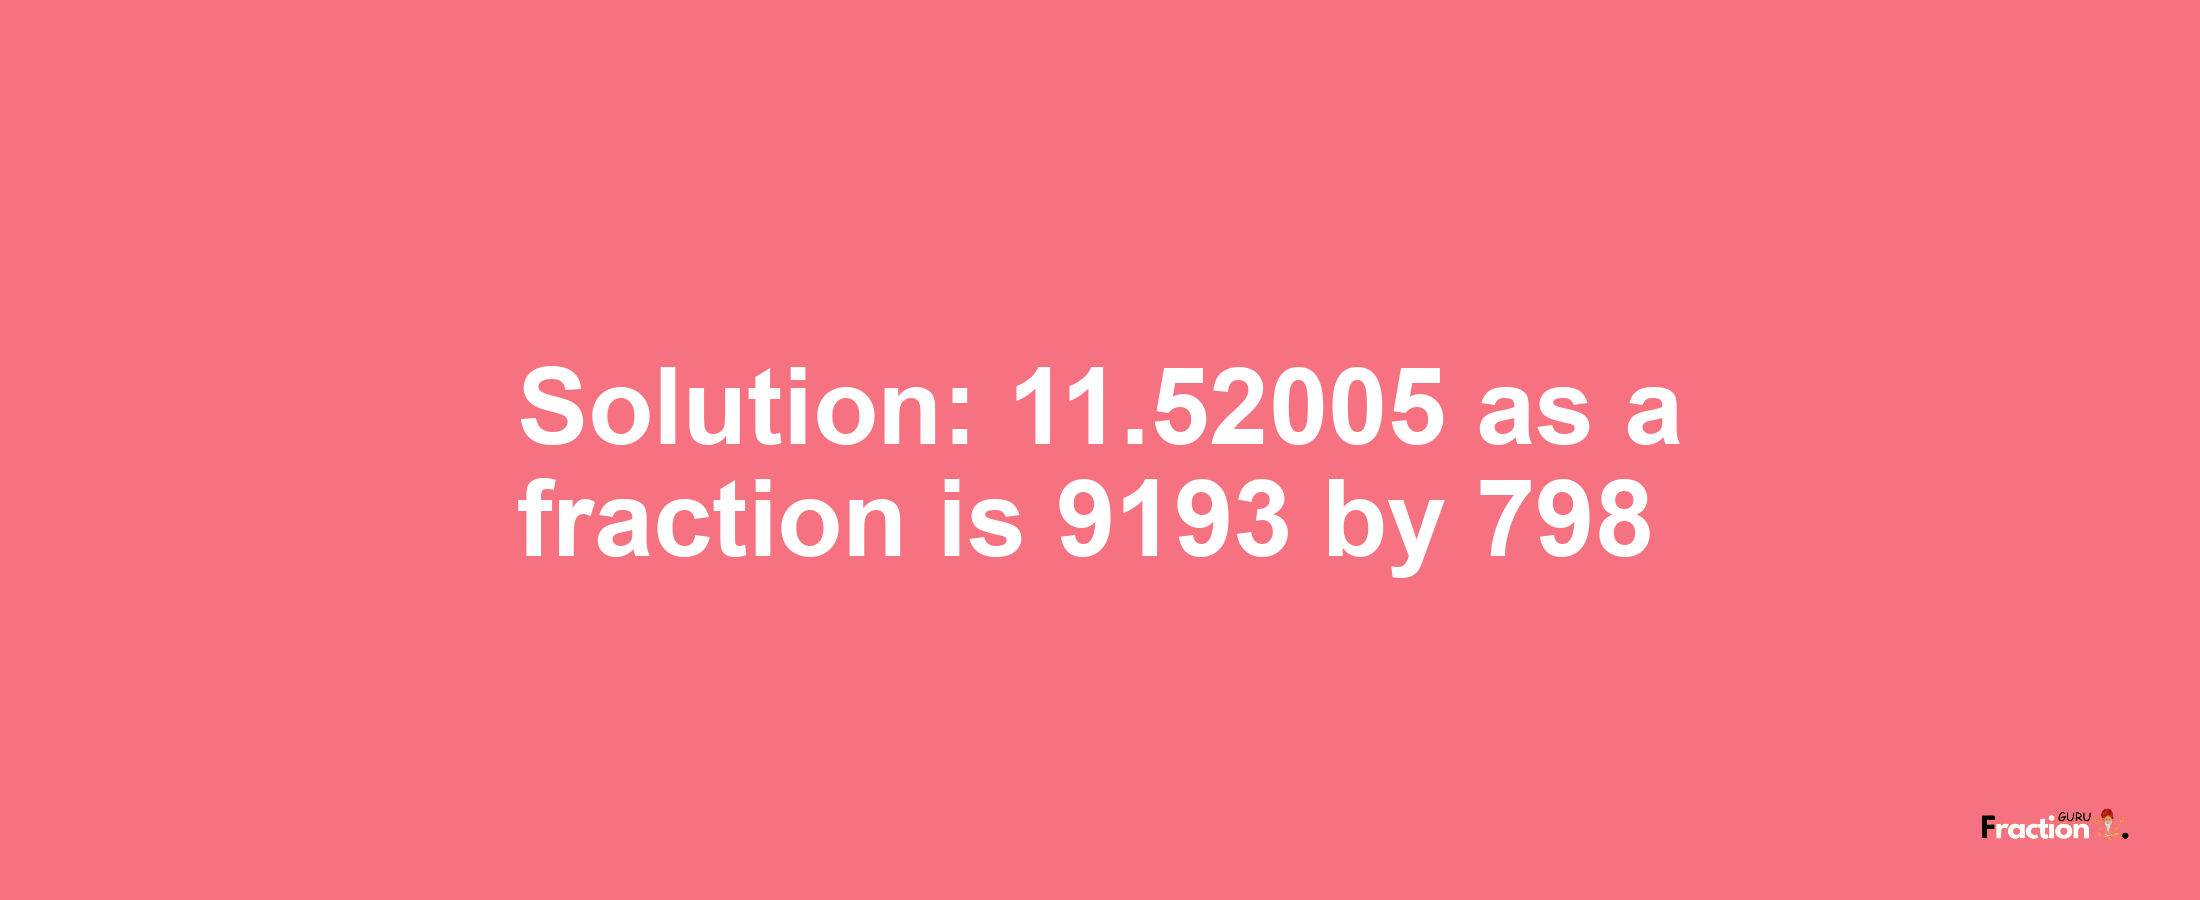 Solution:11.52005 as a fraction is 9193/798